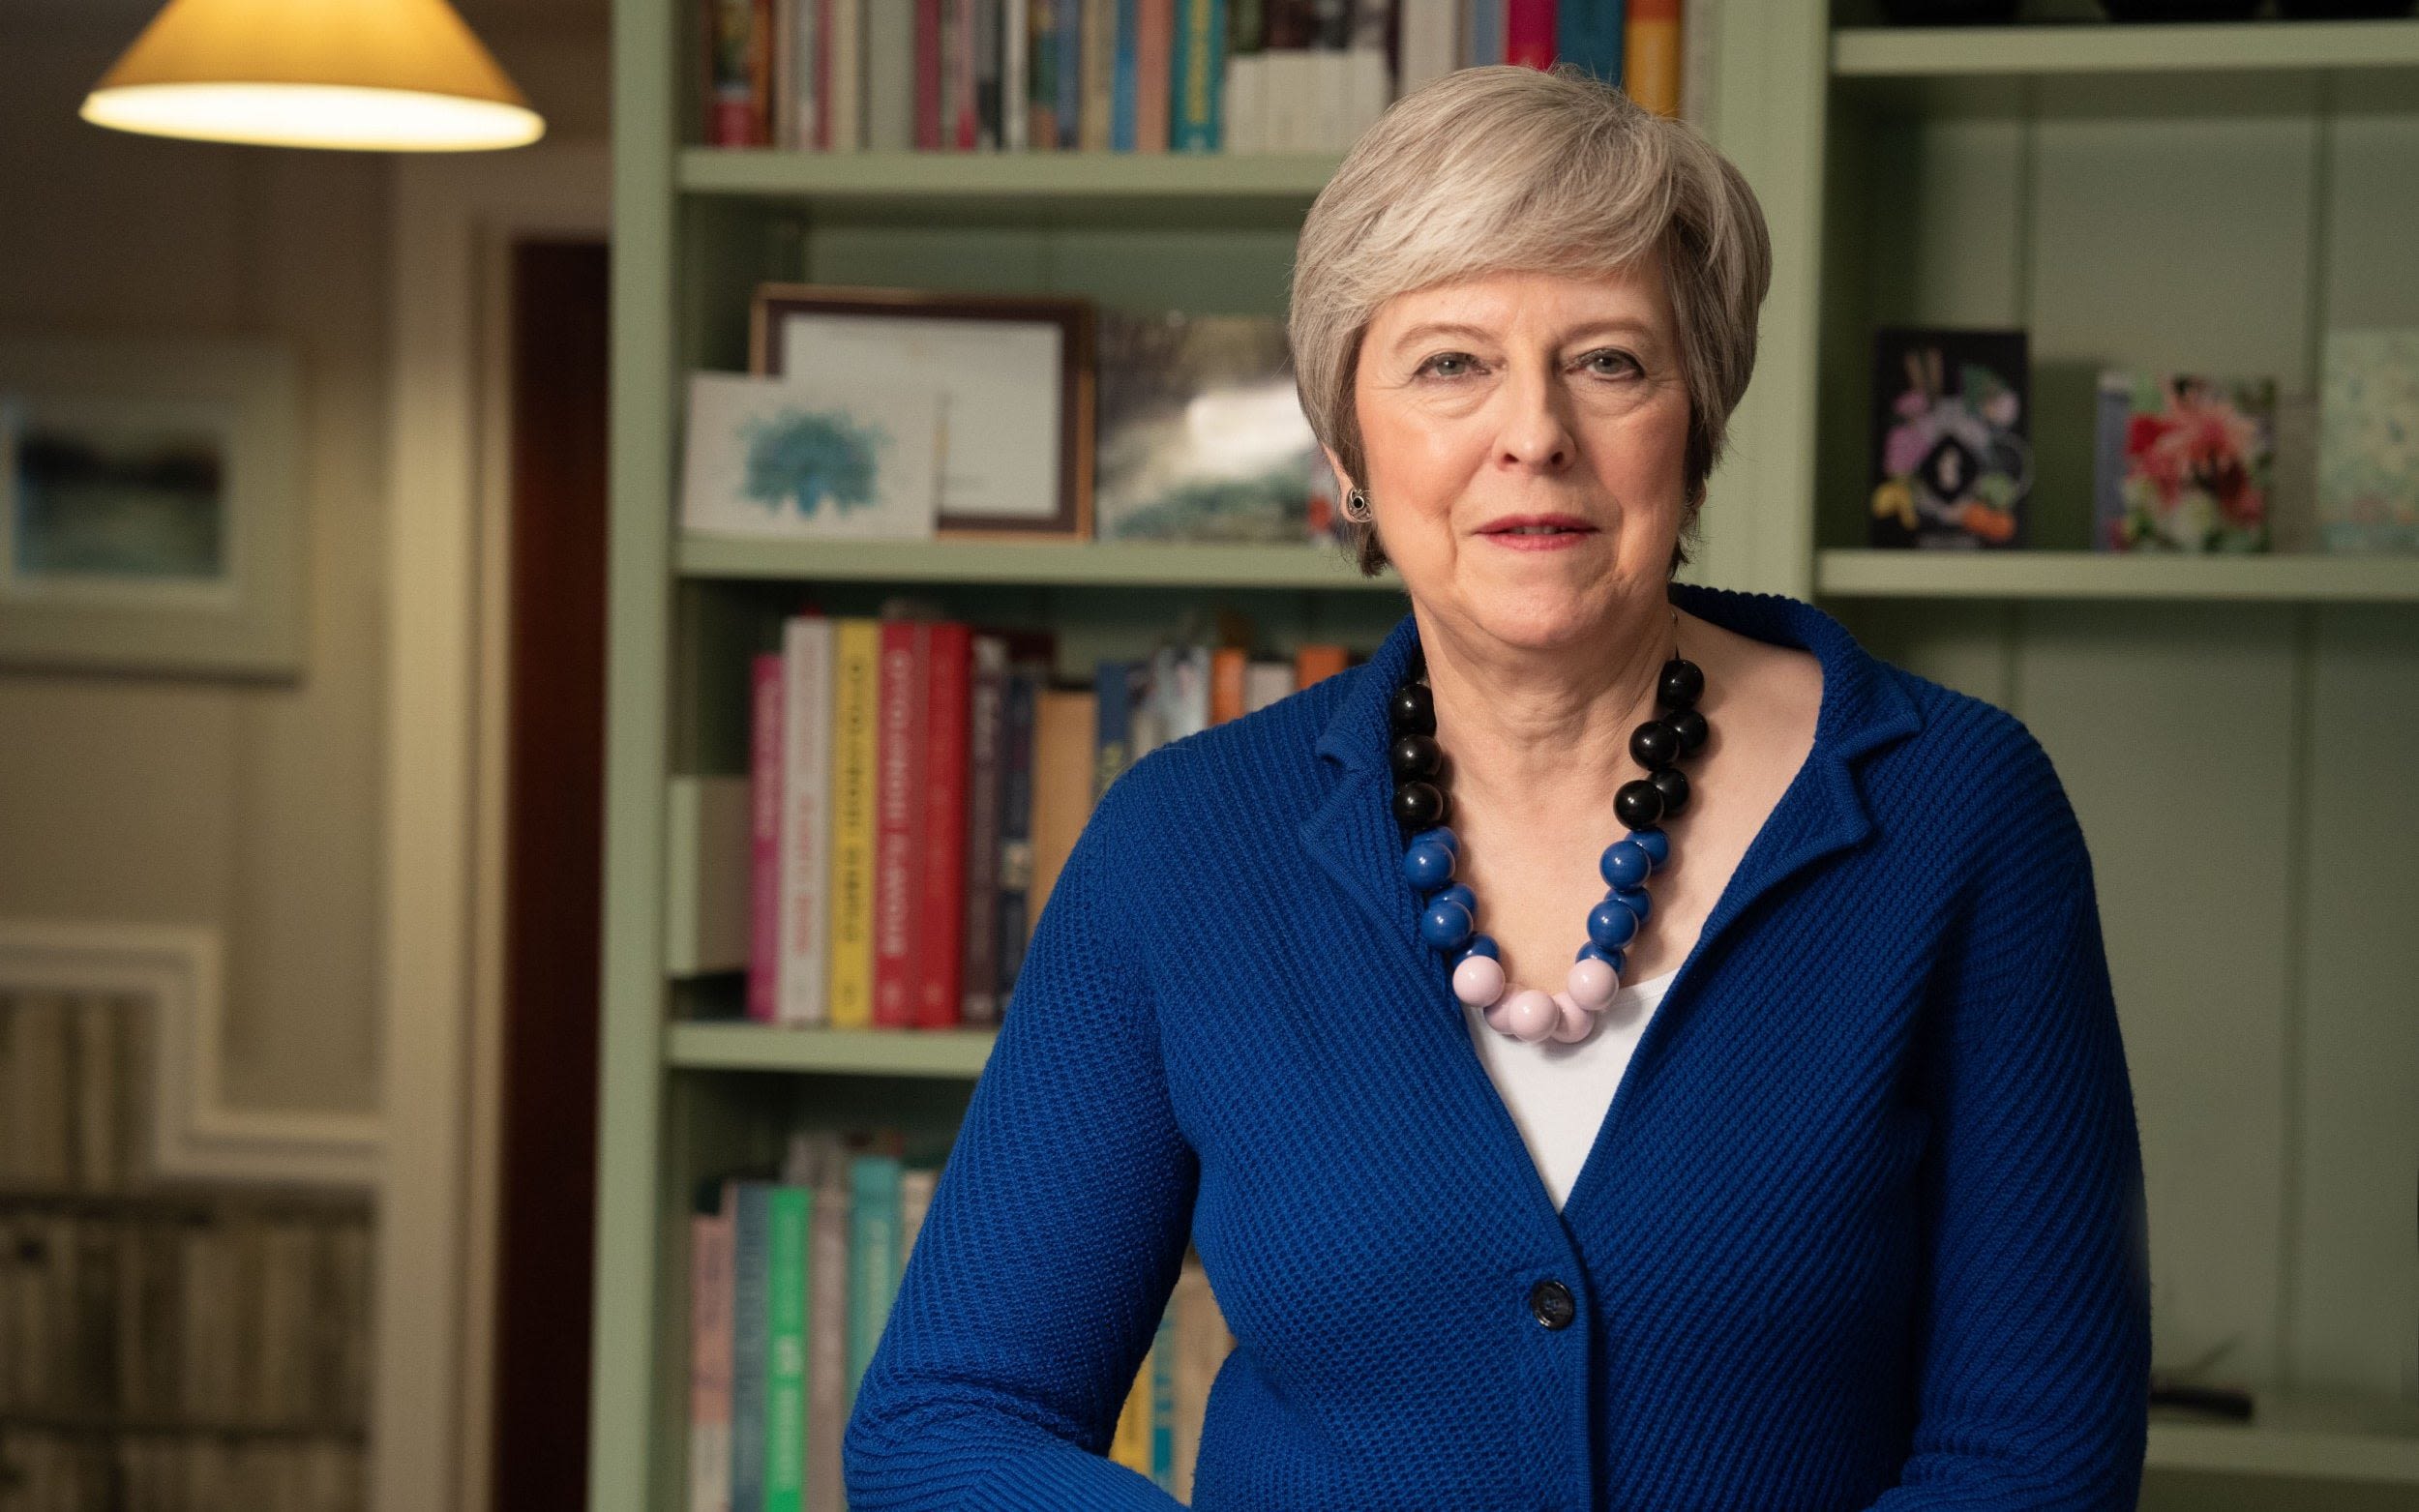 Theresa May: The Accidental Prime Minister, review: even as she departs, May remains tight-lipped